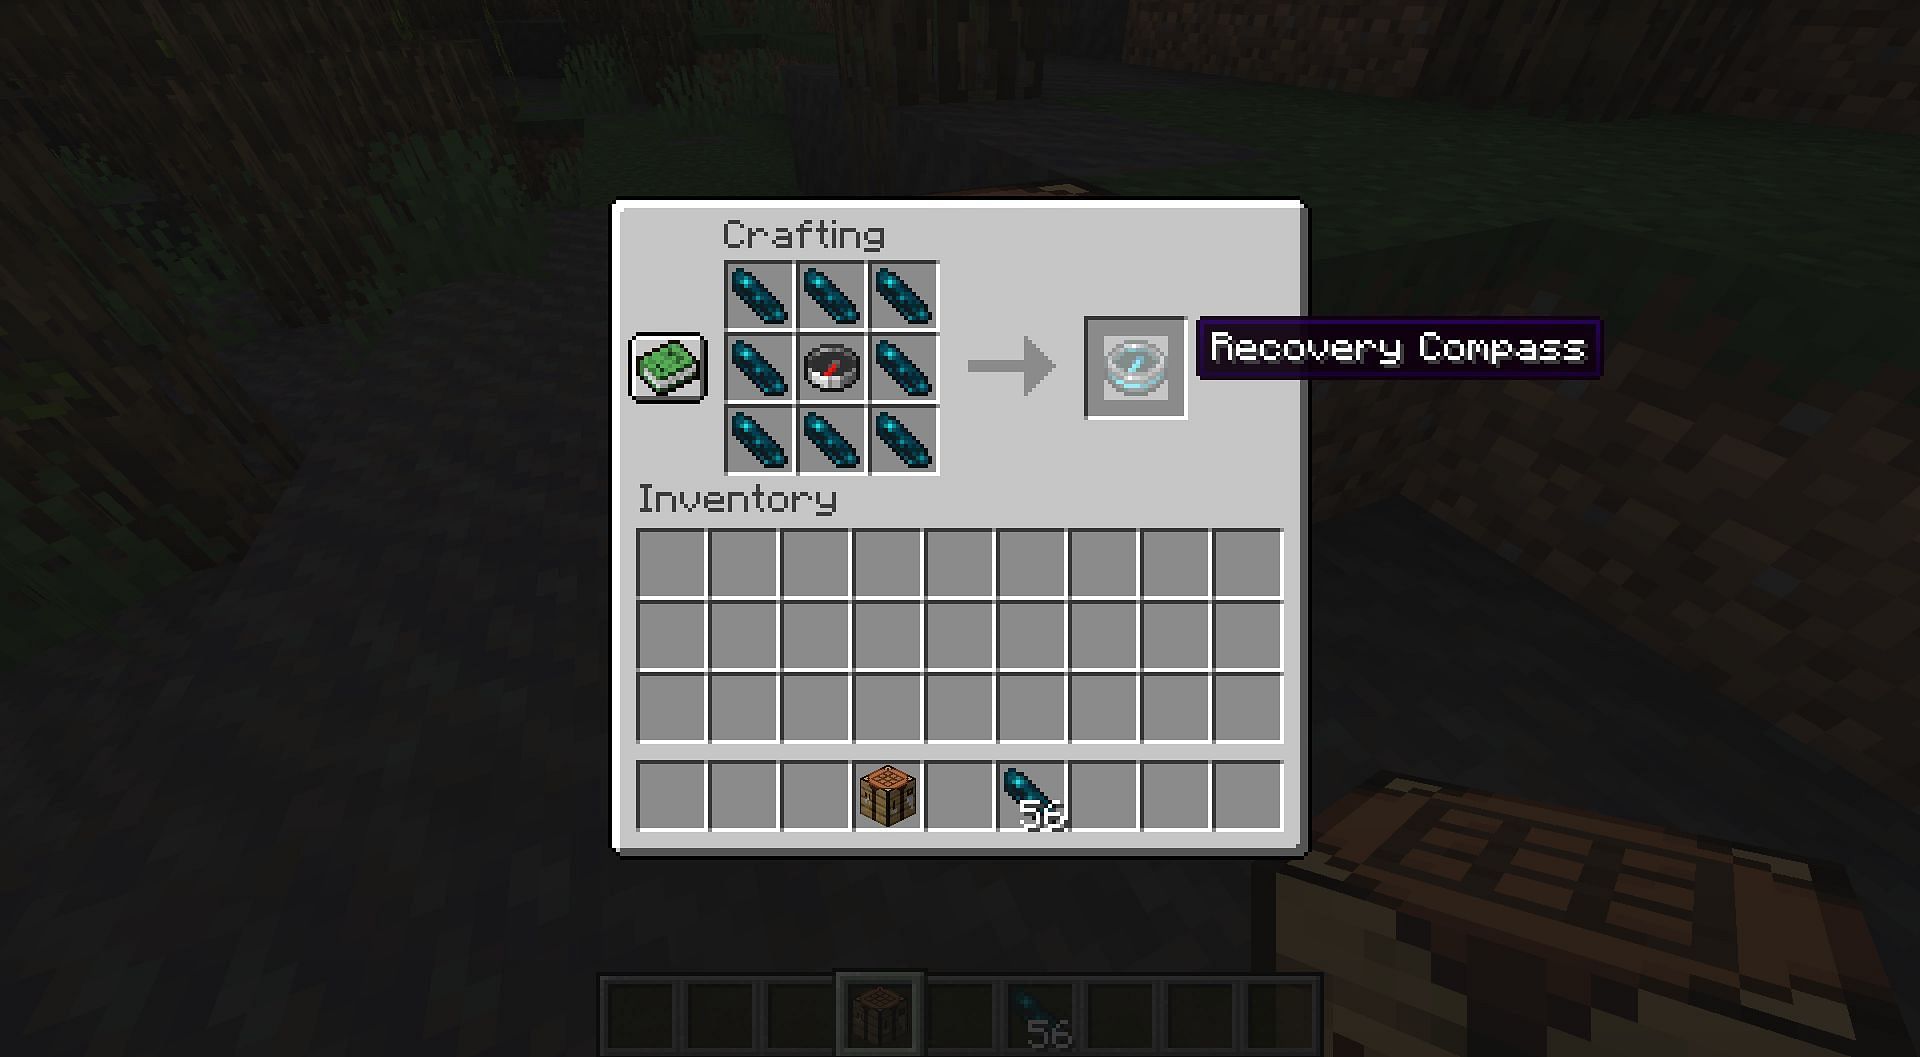 Crafting recipe for the recovery compass in Minecraft (Image via Mojang)